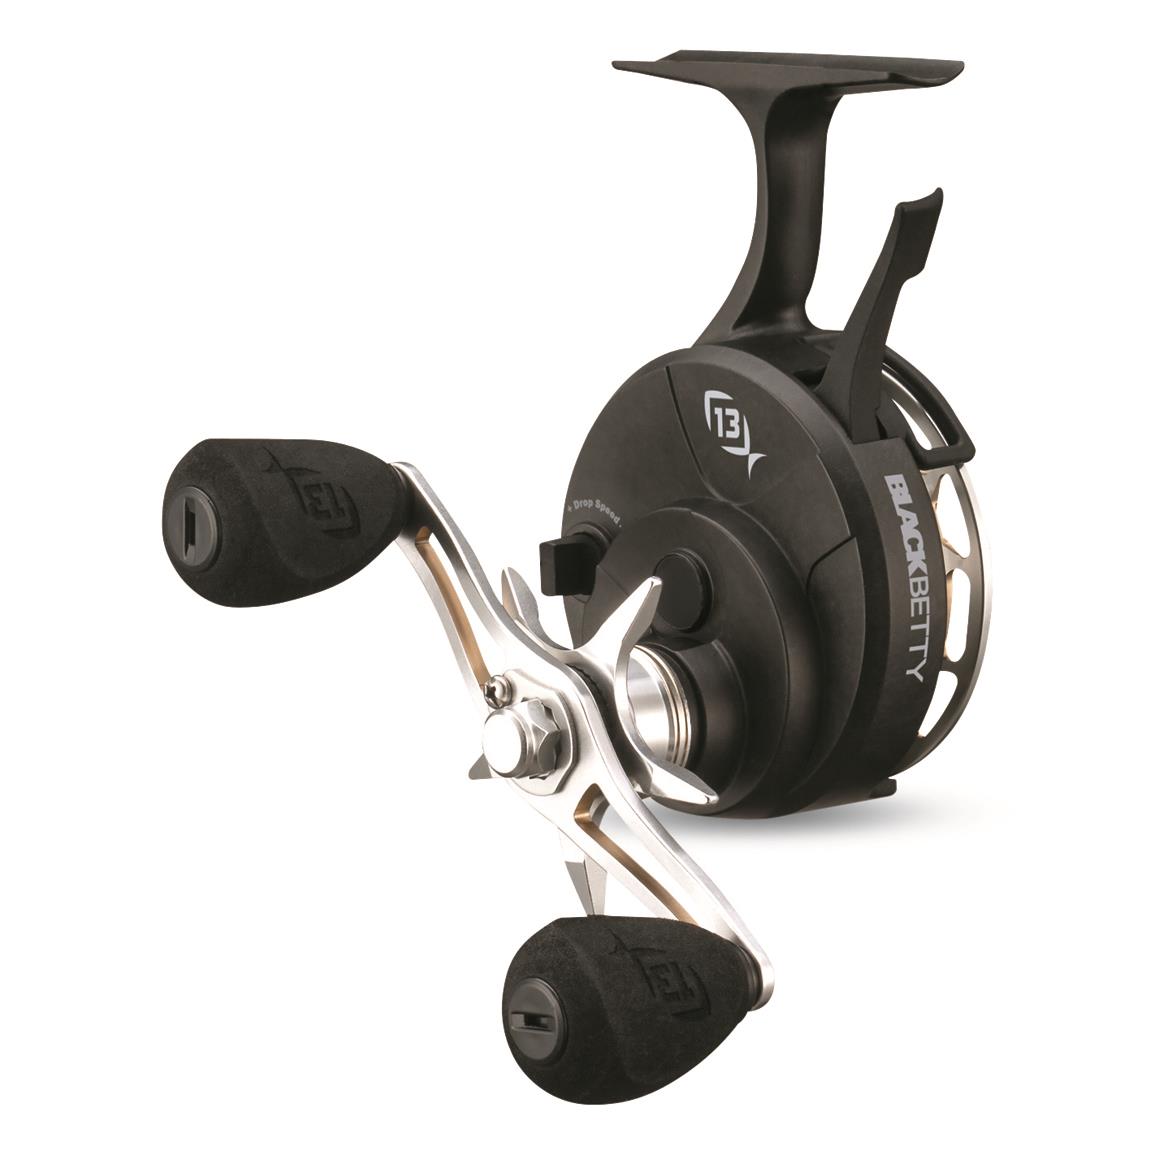 13 Fishing Intent GTS Spinning Combo, 6'10 Length, Medium Light Power, 2000  Reel Size - 729834, Spinning Combos at Sportsman's Guide